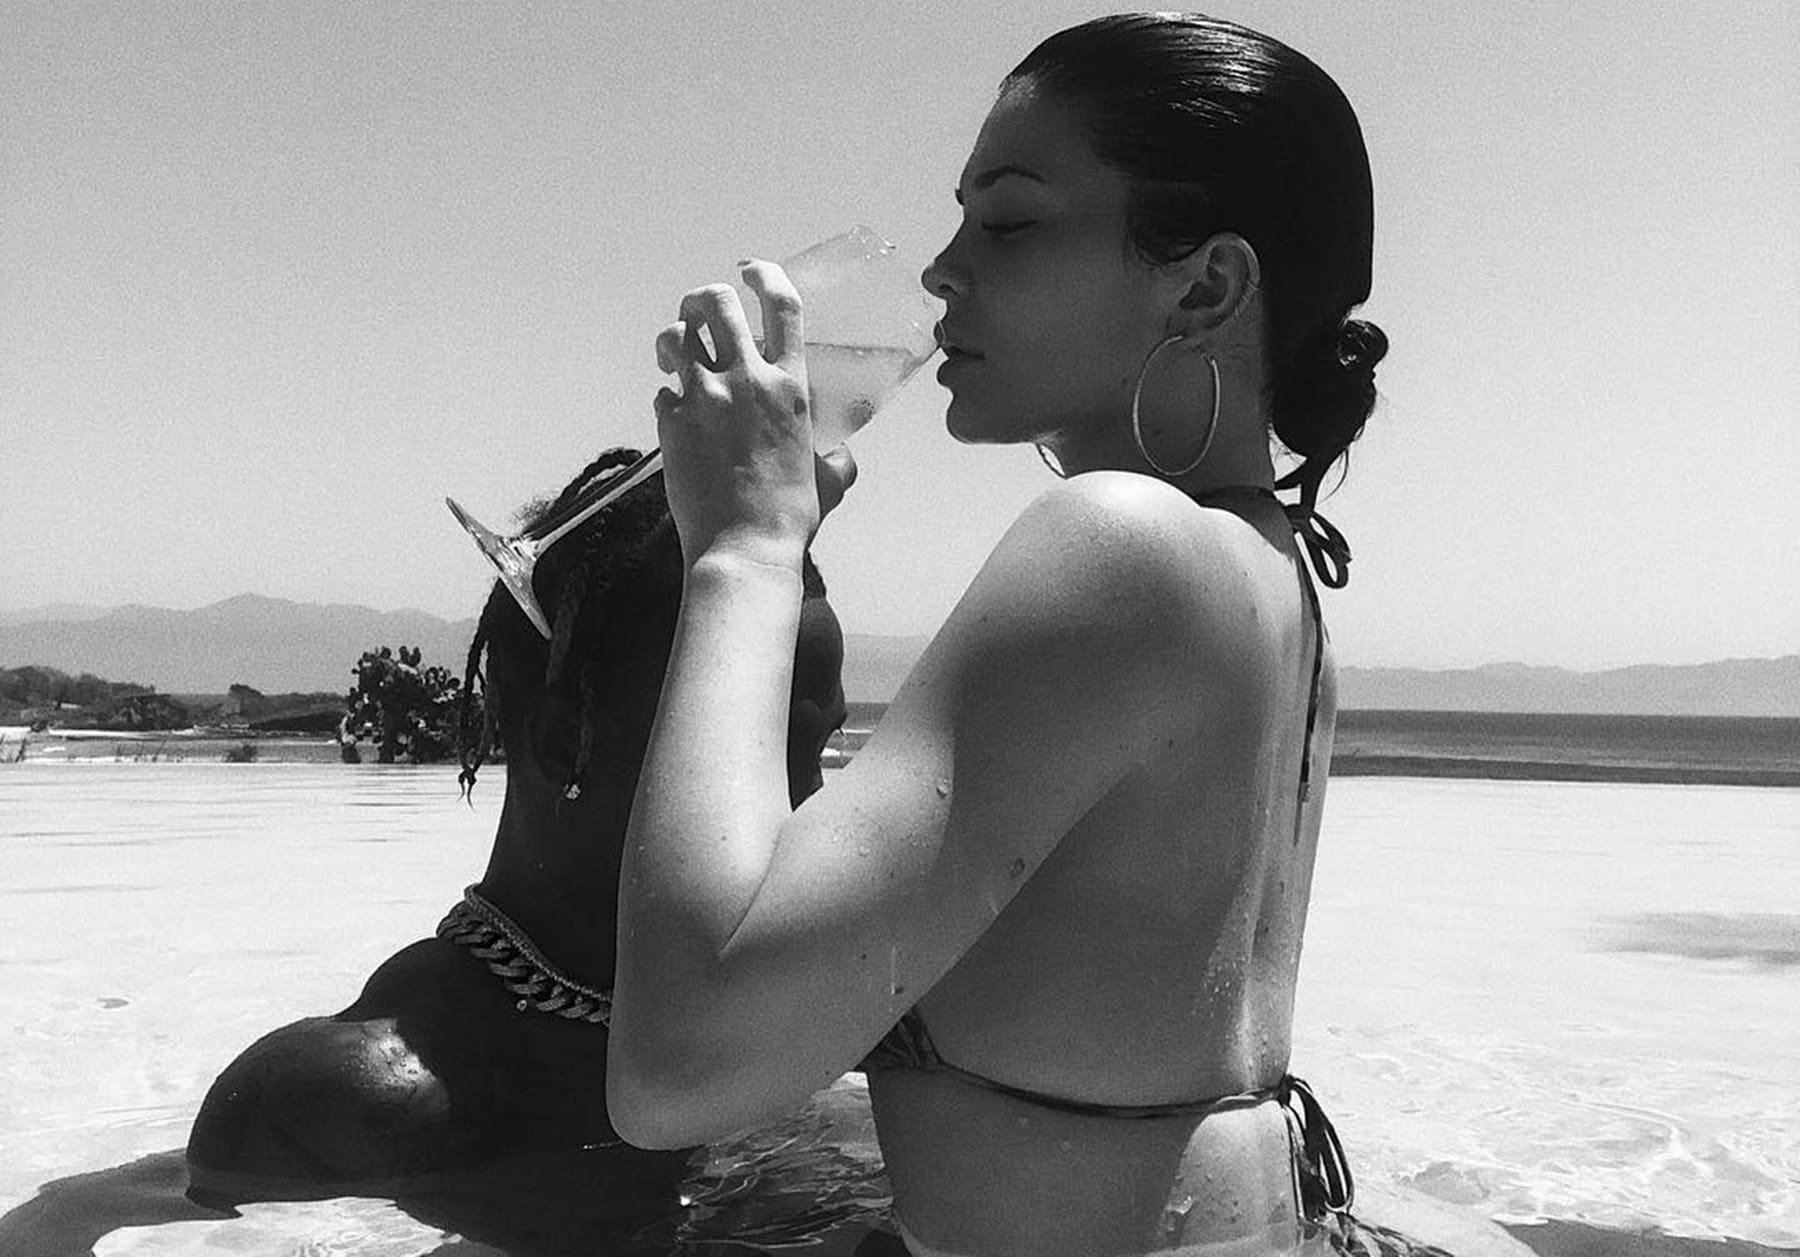 Kylie Jenner Turns Up Heat In Steamy Bathing Suit Picture With Travis Scott ...1800 x 1257